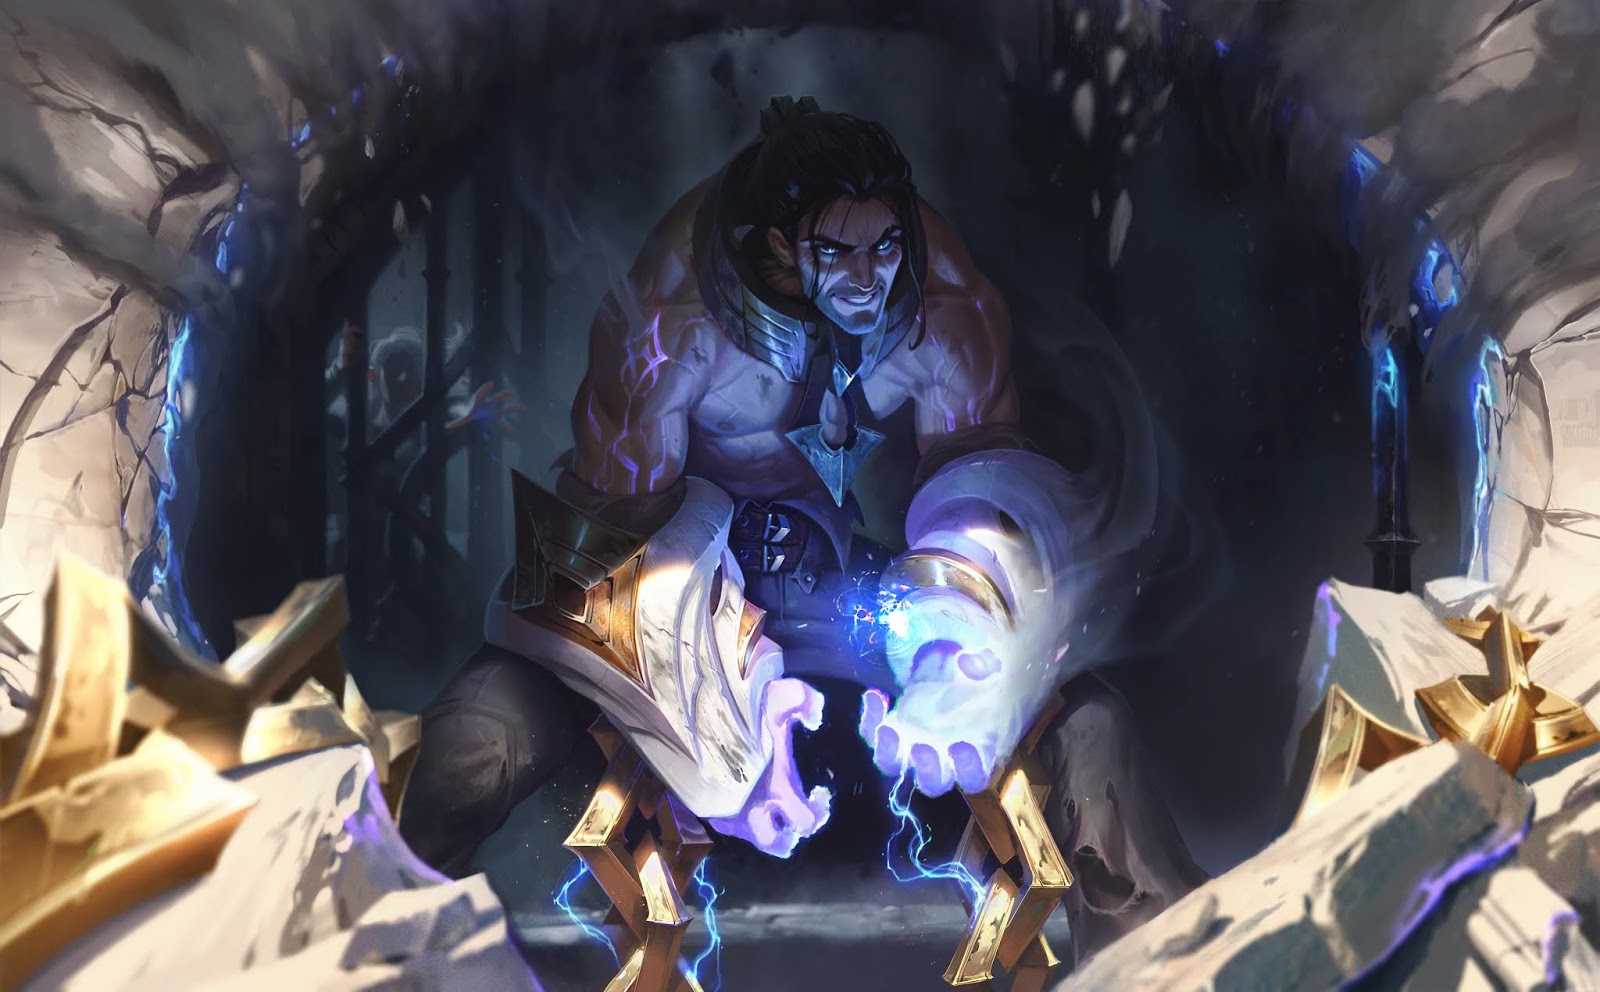 Surrender At 20 Champion Reveal Sylas The Unshackled 